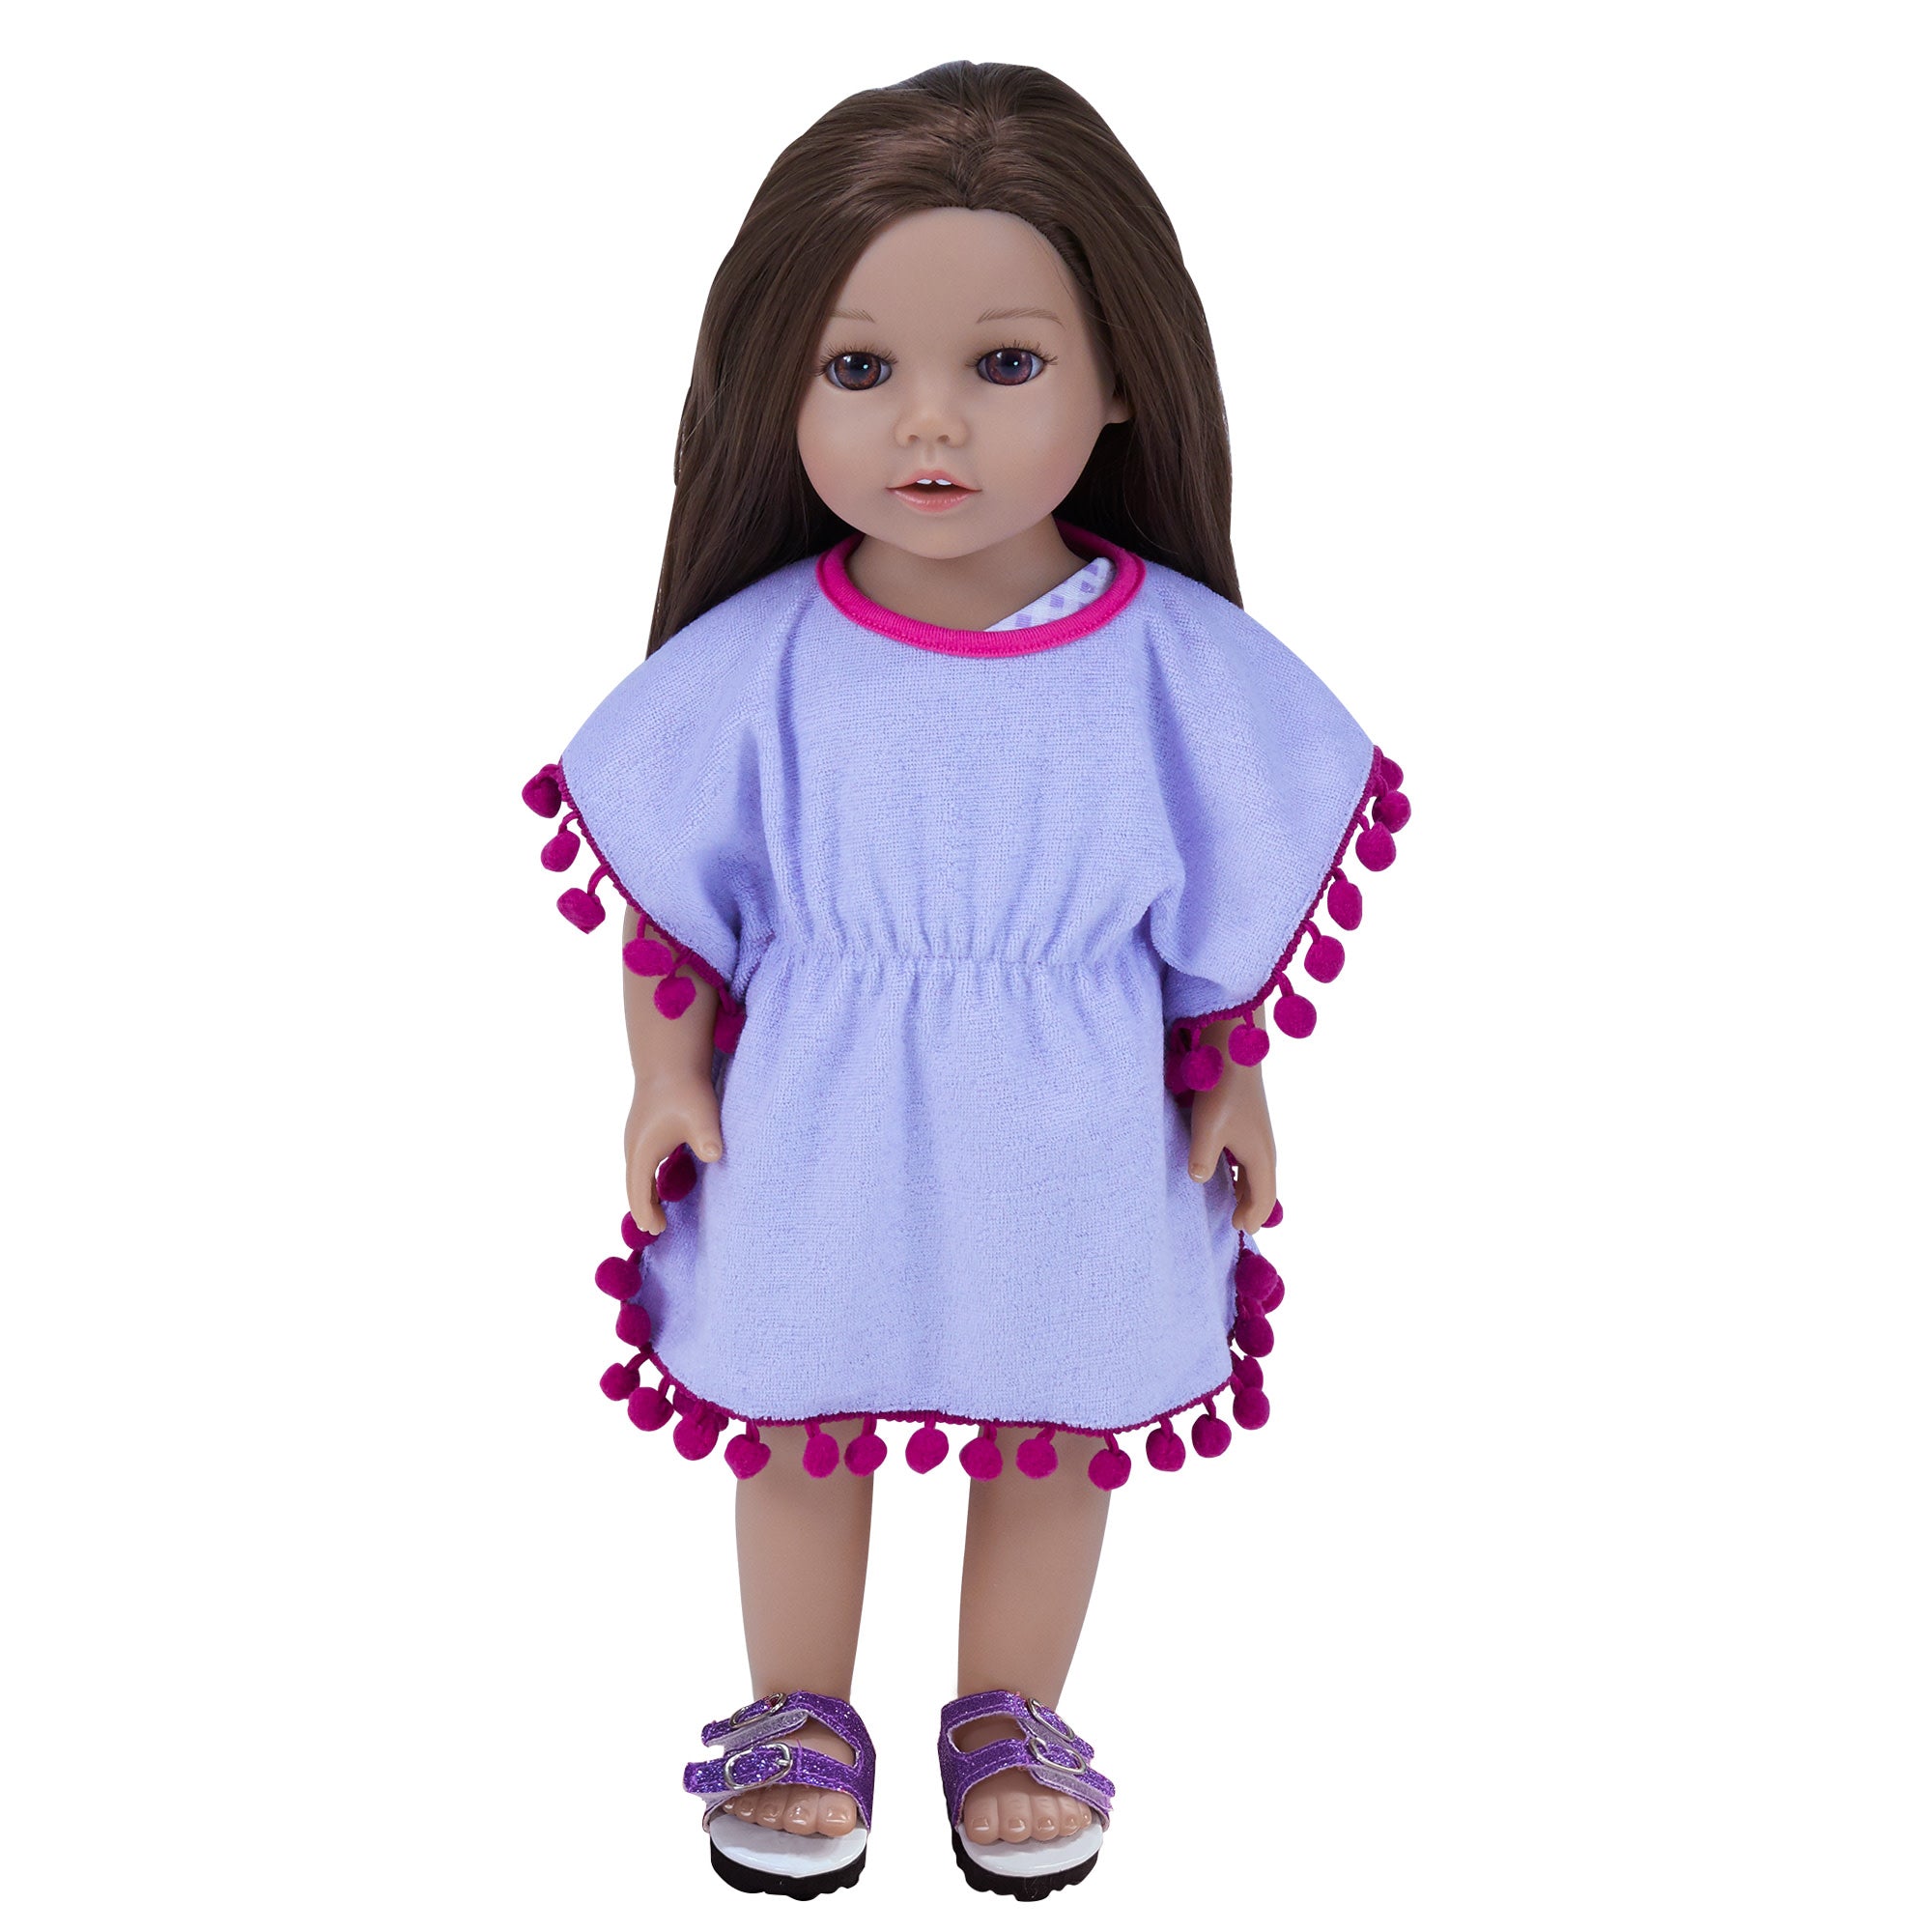 Sophia's 3 Piece Swim Set with Cut-Out Bathing Suit, Cover Up and Sandals for 18" Dolls, Pink/Purple